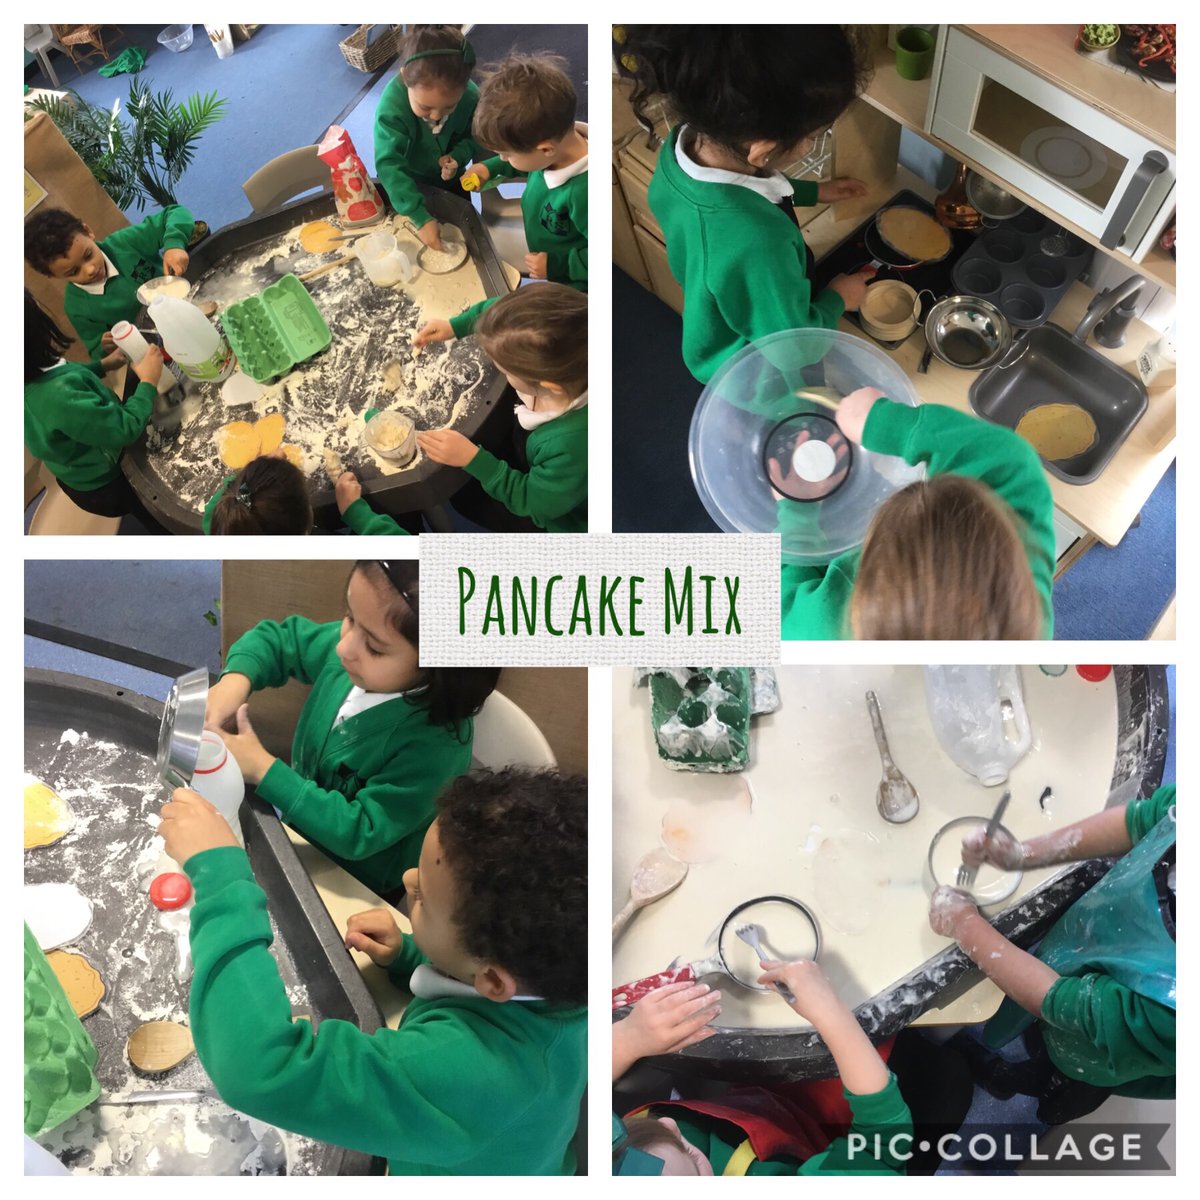 We had a ‘flipping’ good Pancake Day 👩‍🍳🥚🥛👨🏻‍🍳 mixing, stirring, pouring and adding ingredients together with “a pinch more flour” (HA). #PancakeDay #shrovetuesday #writingforapurpose #eyfs